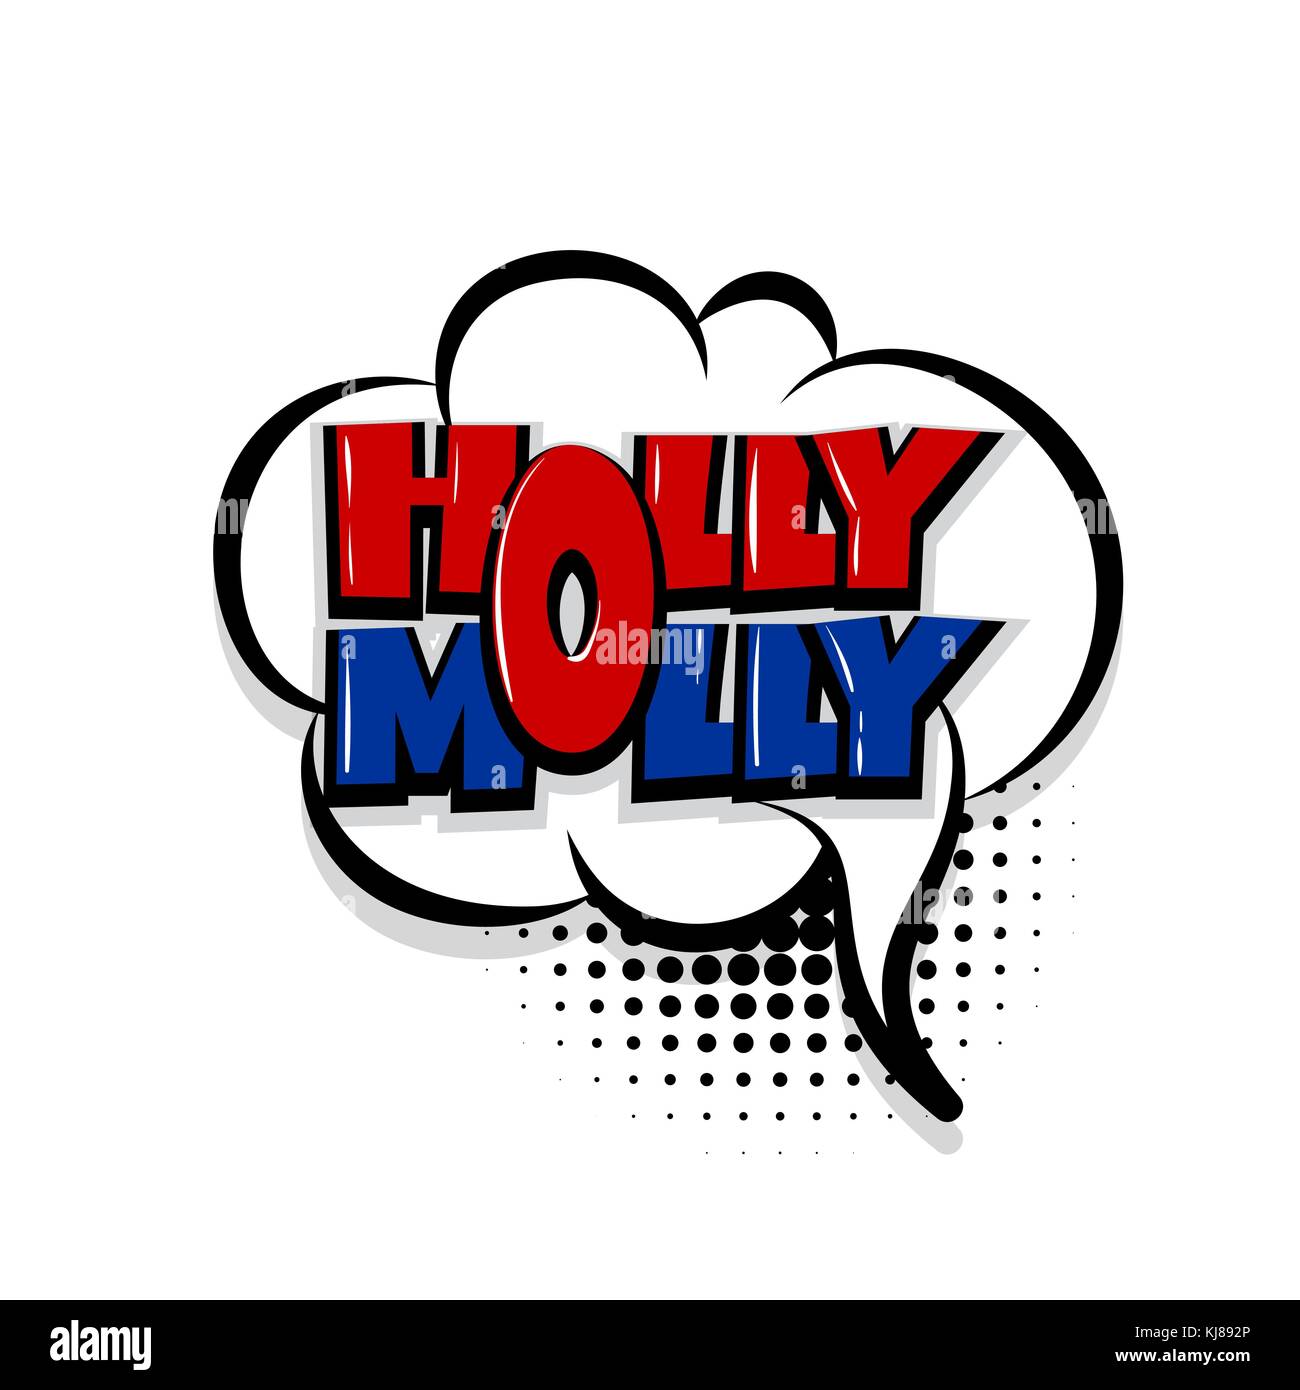 holly molly comic text white background Stock Vector